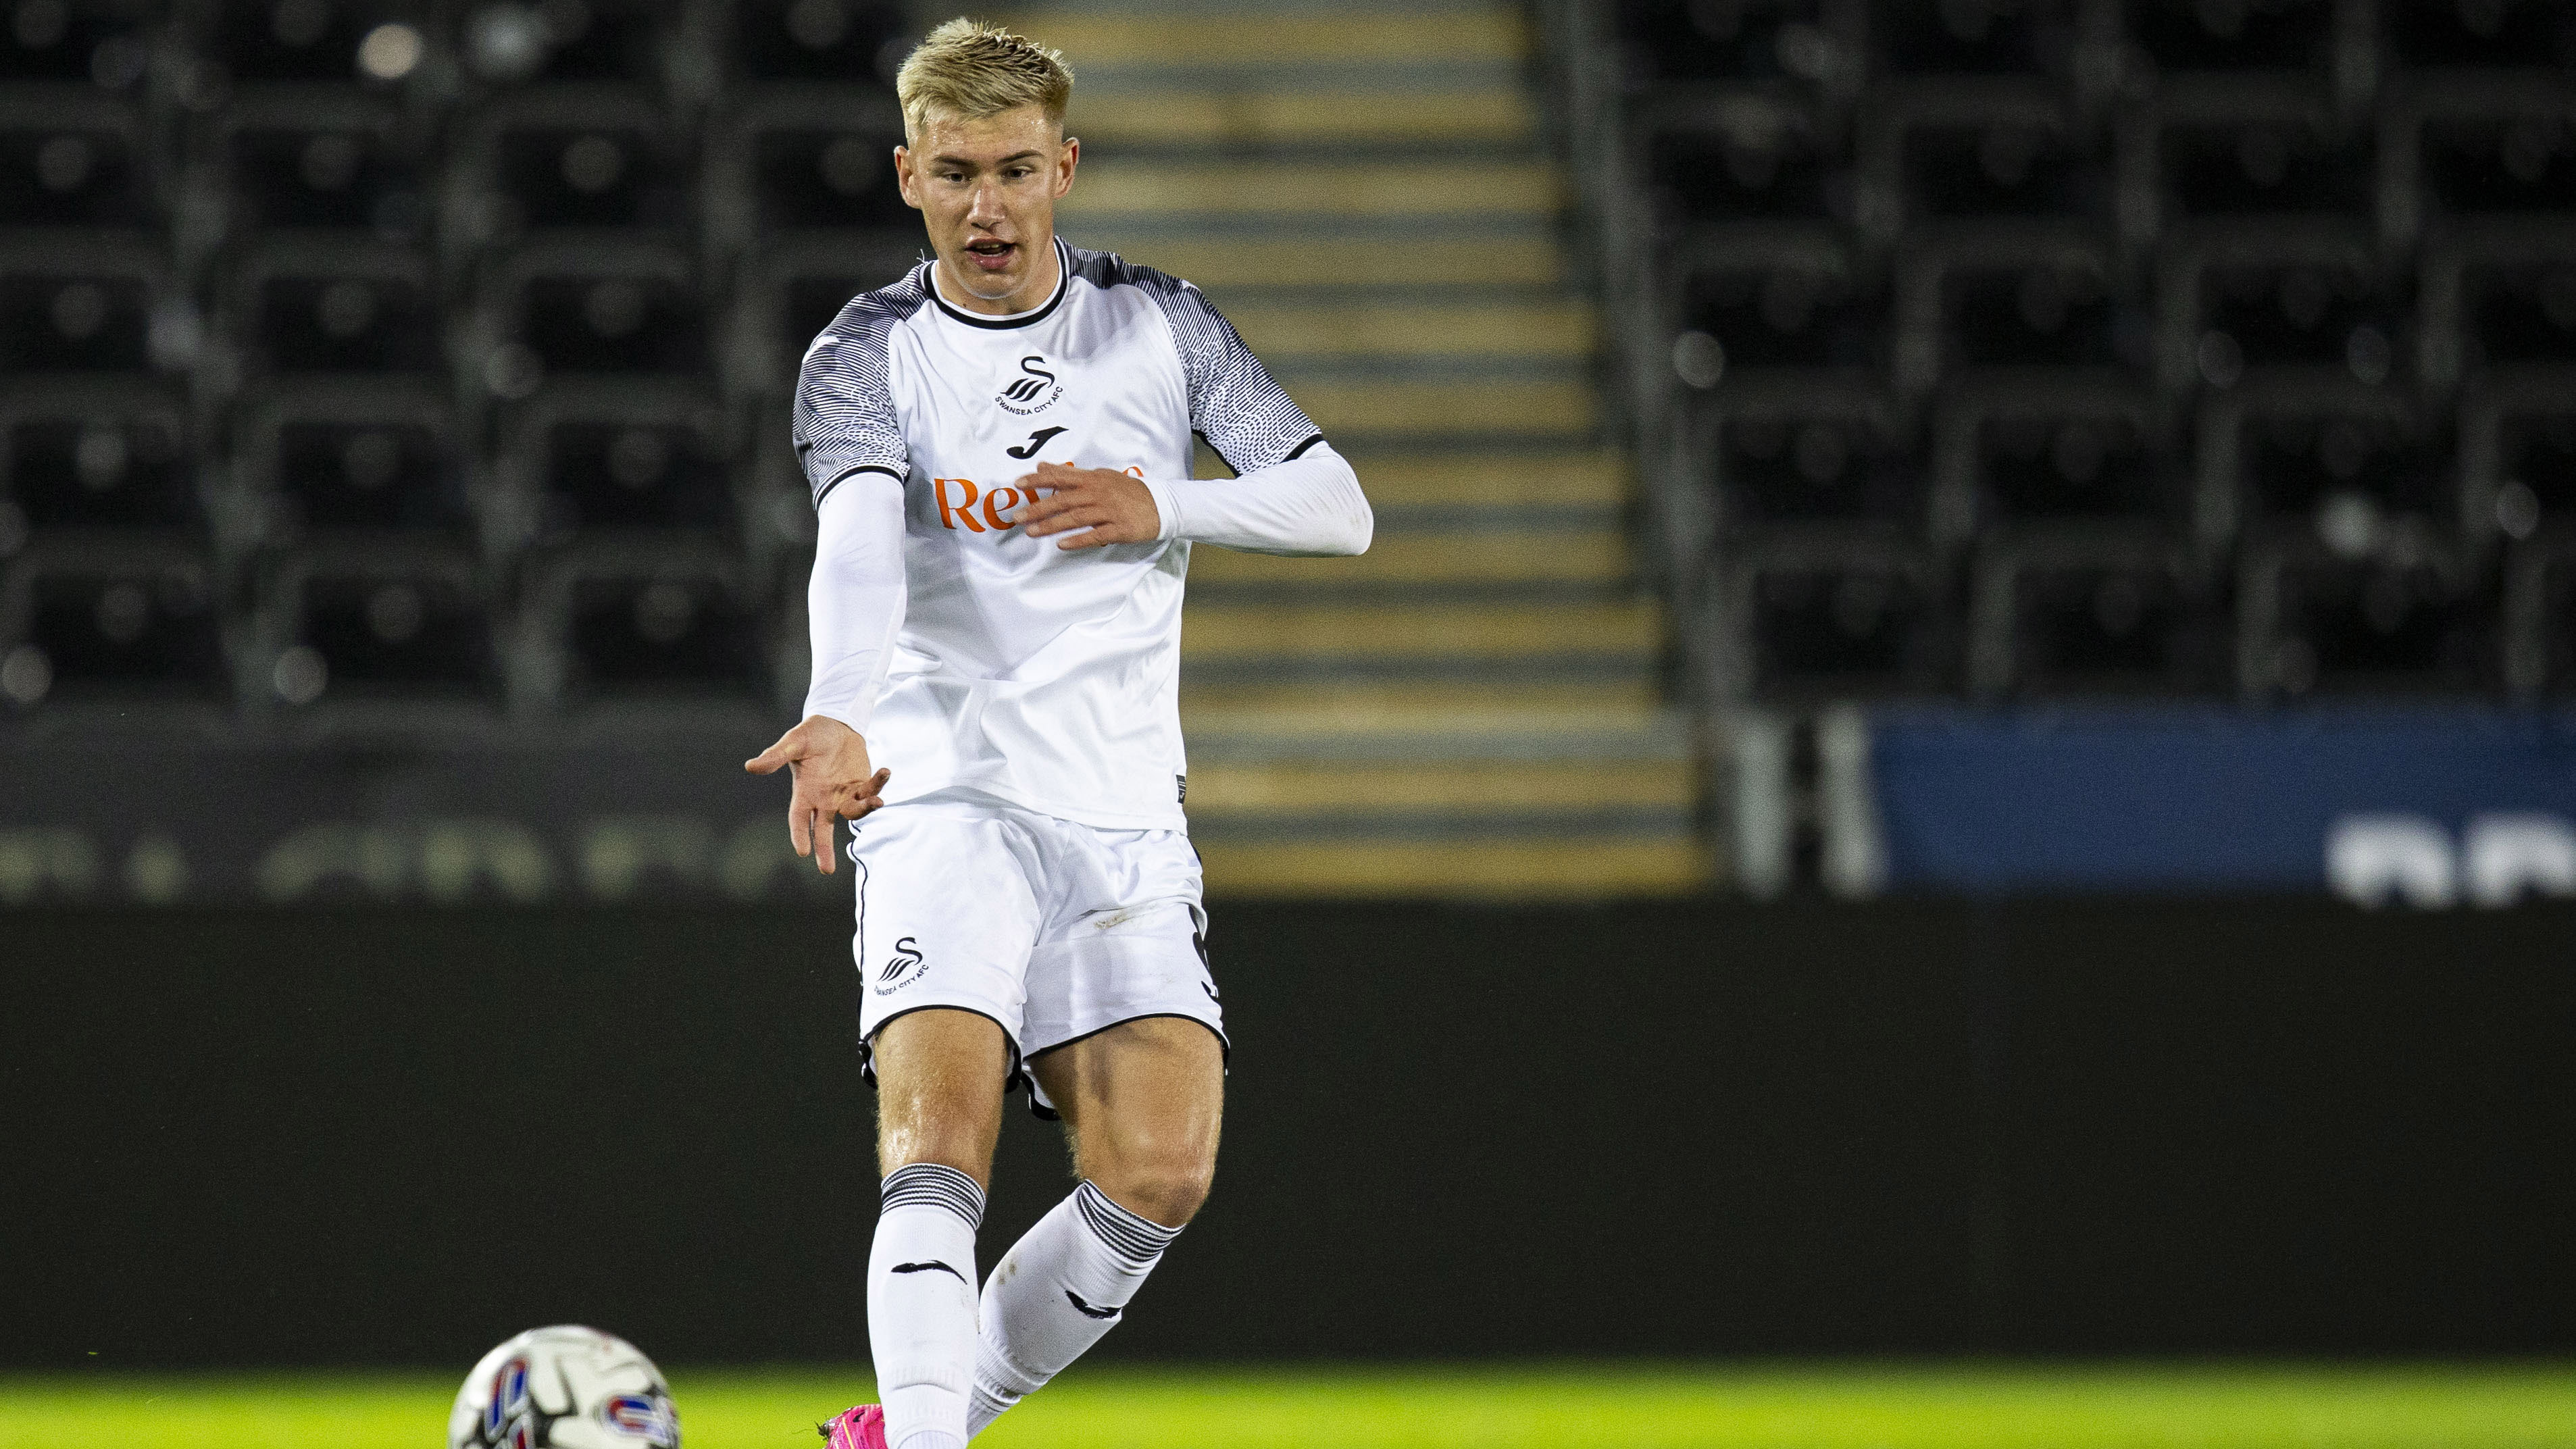 Swansea City U21 defeated Cardiff City U21 in the third round of